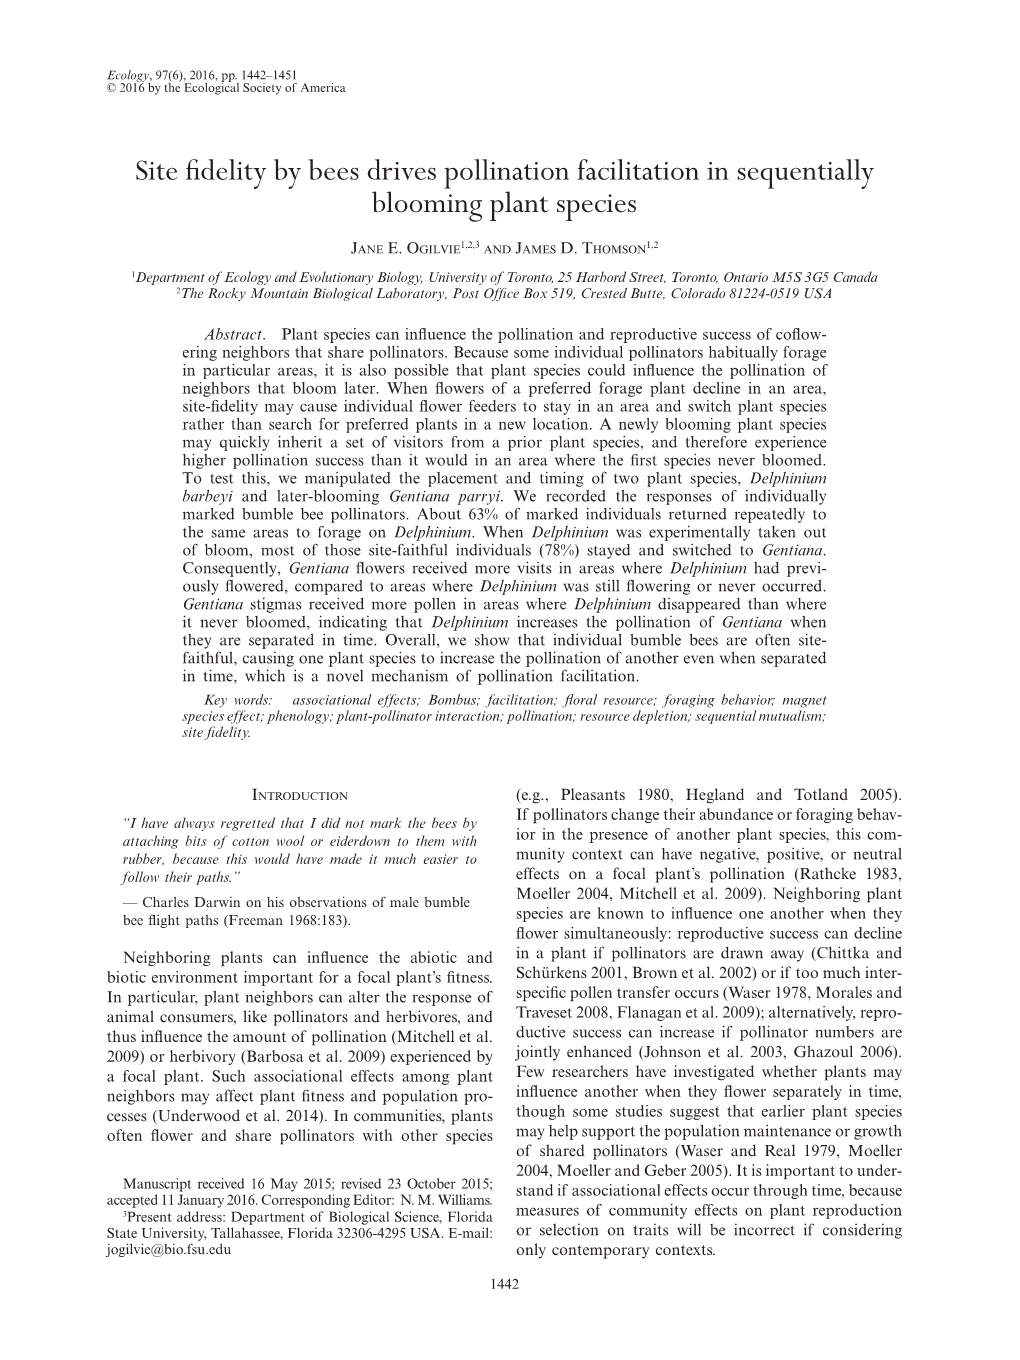 Site Fidelity by Bees Drives Pollination Facilitation in Sequentially Blooming Plant Species